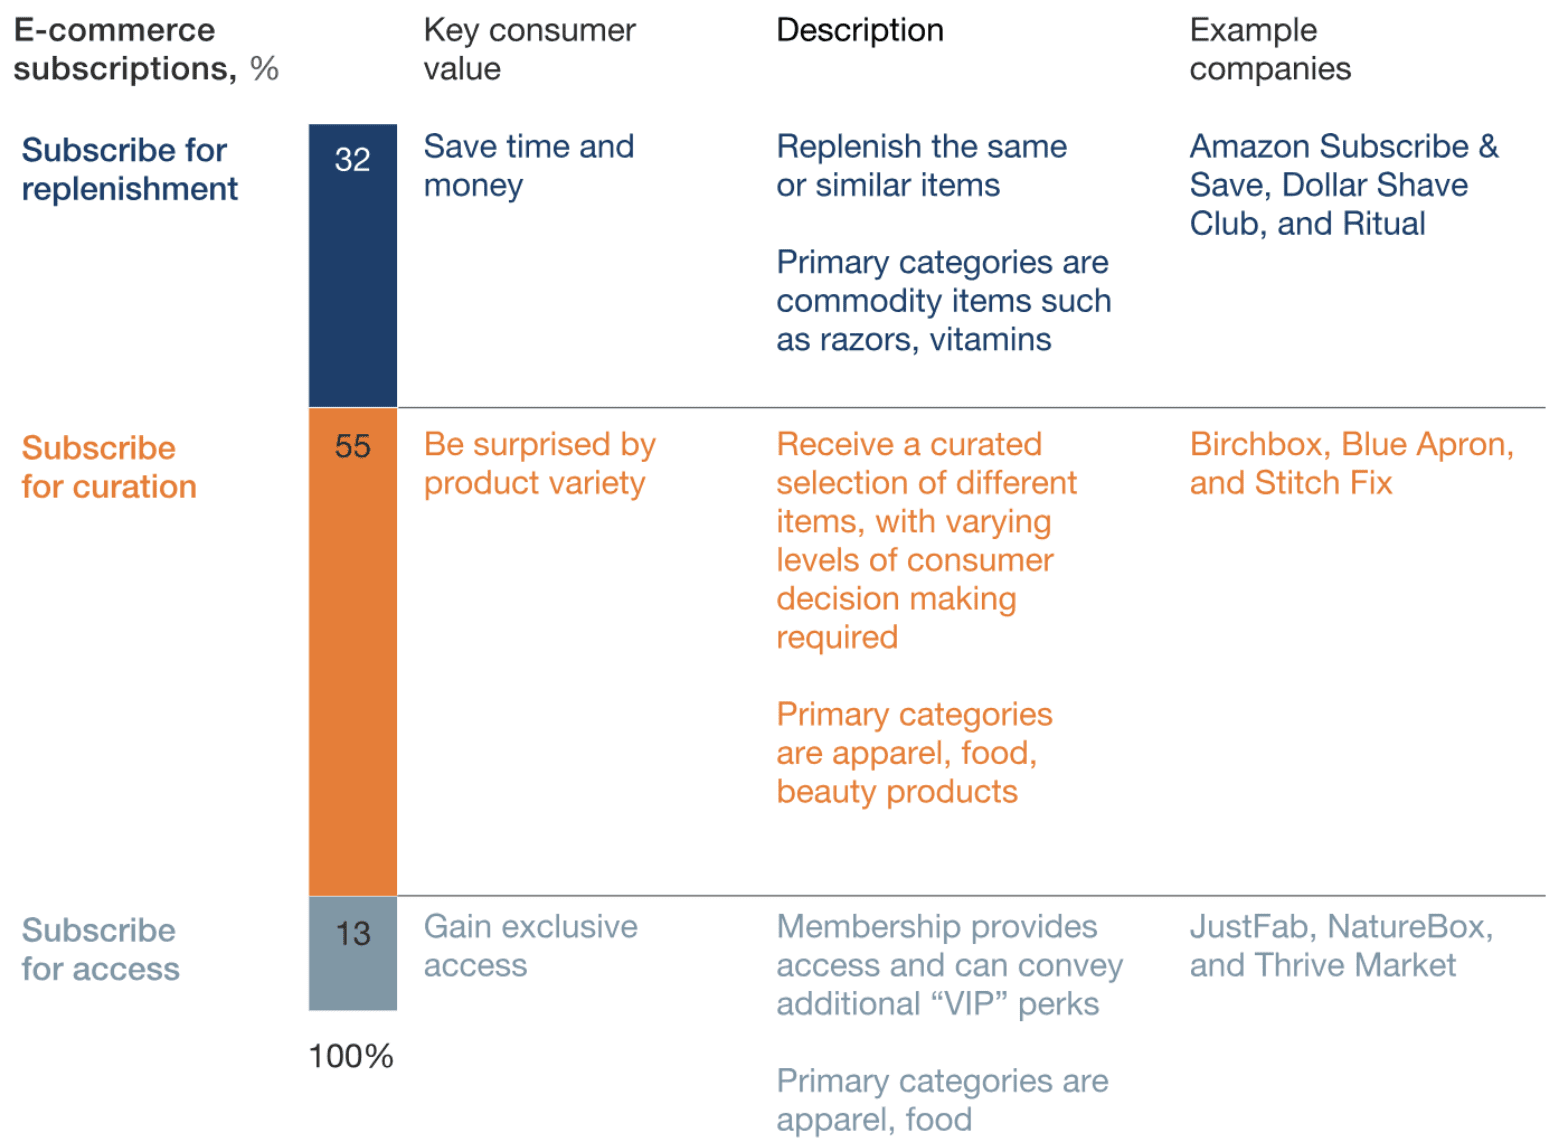 McKinsey 2018 research on e-commerce consumers